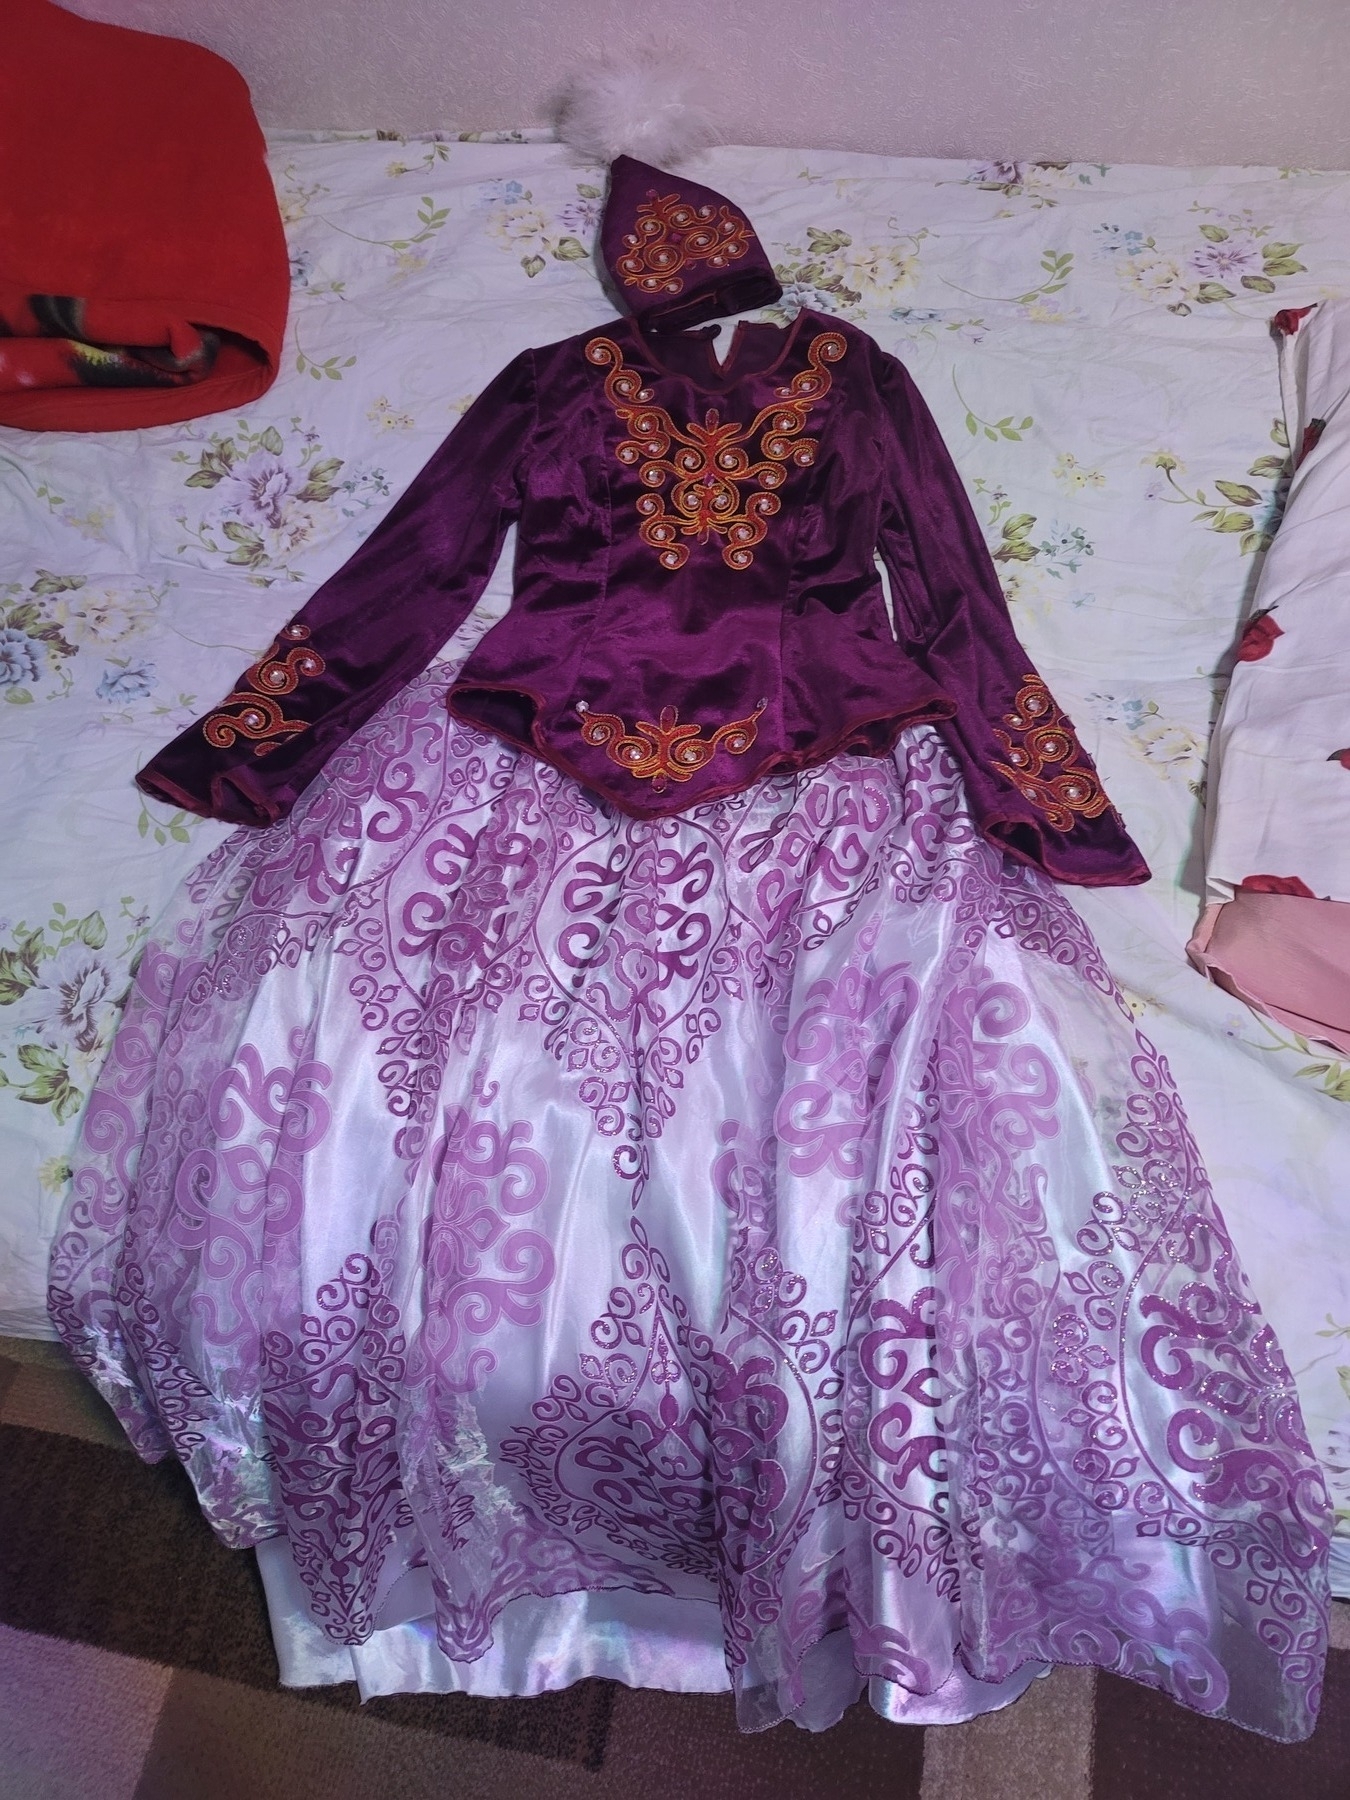 traditional female Kyrgyz clothes - long skirt with white silk slip and a mesh outer layer with a purple pattern; purple velvet-like top with red/orange embellishments; matching purple hat with red/orange embellishments and white feathers from the top